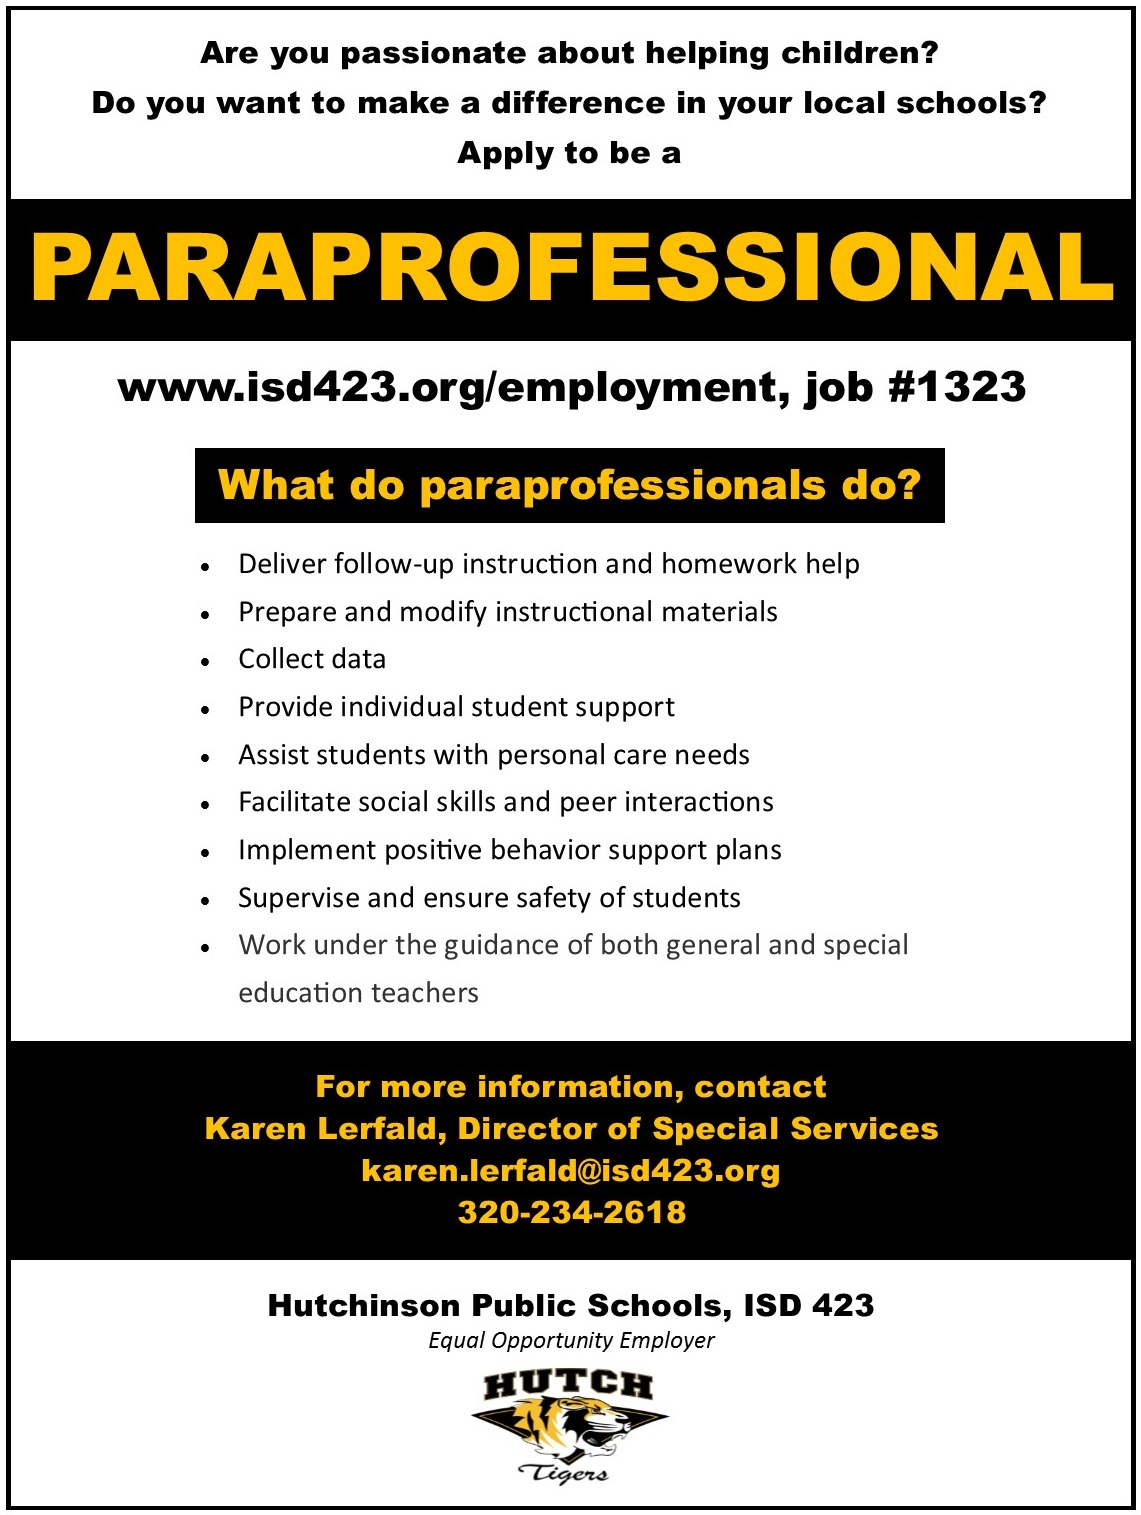 Join the Team as a Paraprofessional!